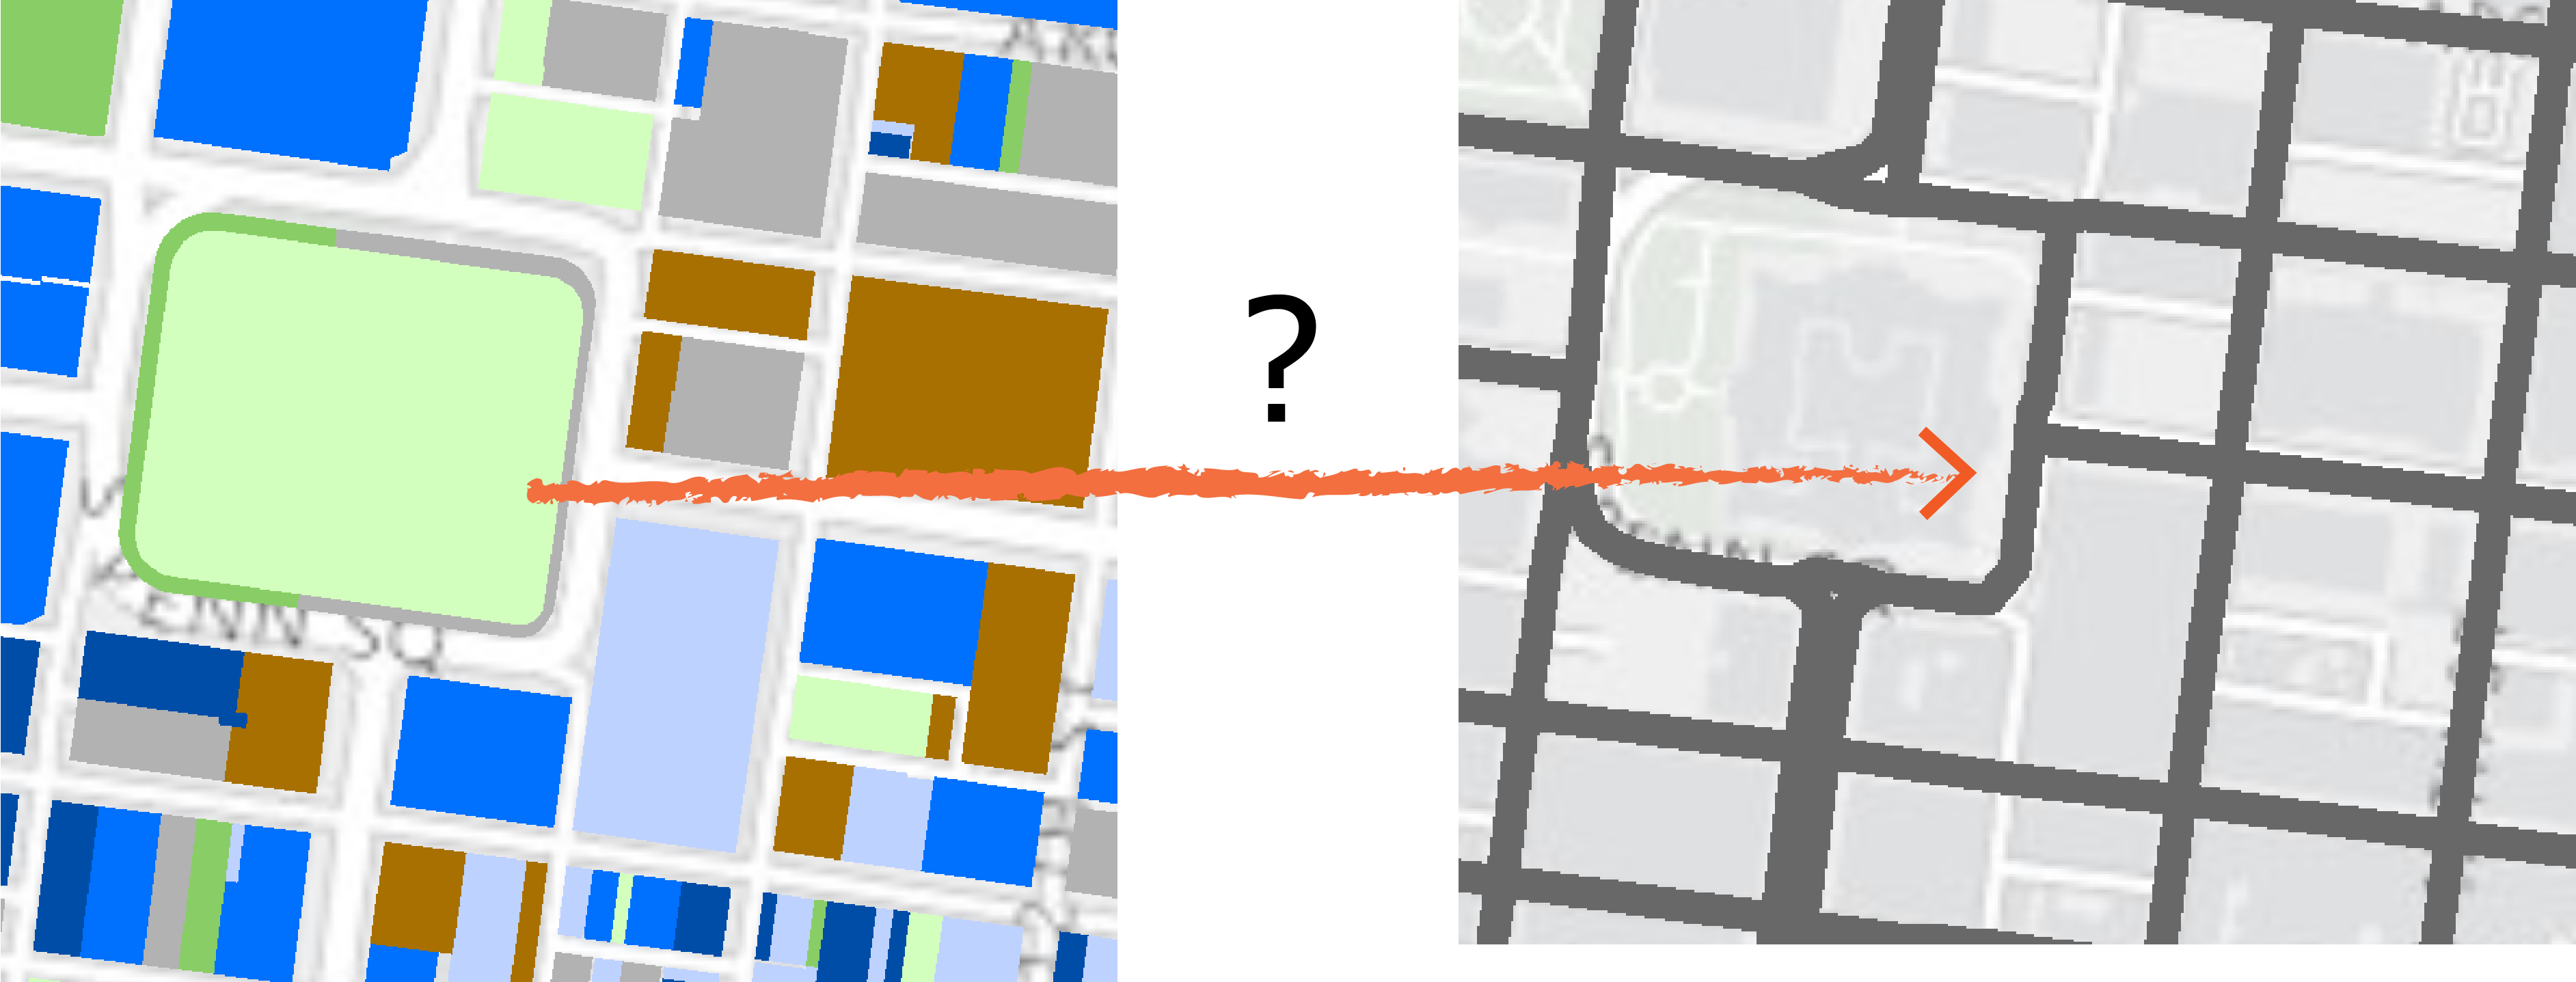 Streets are difficult to reconcile with land use polygons